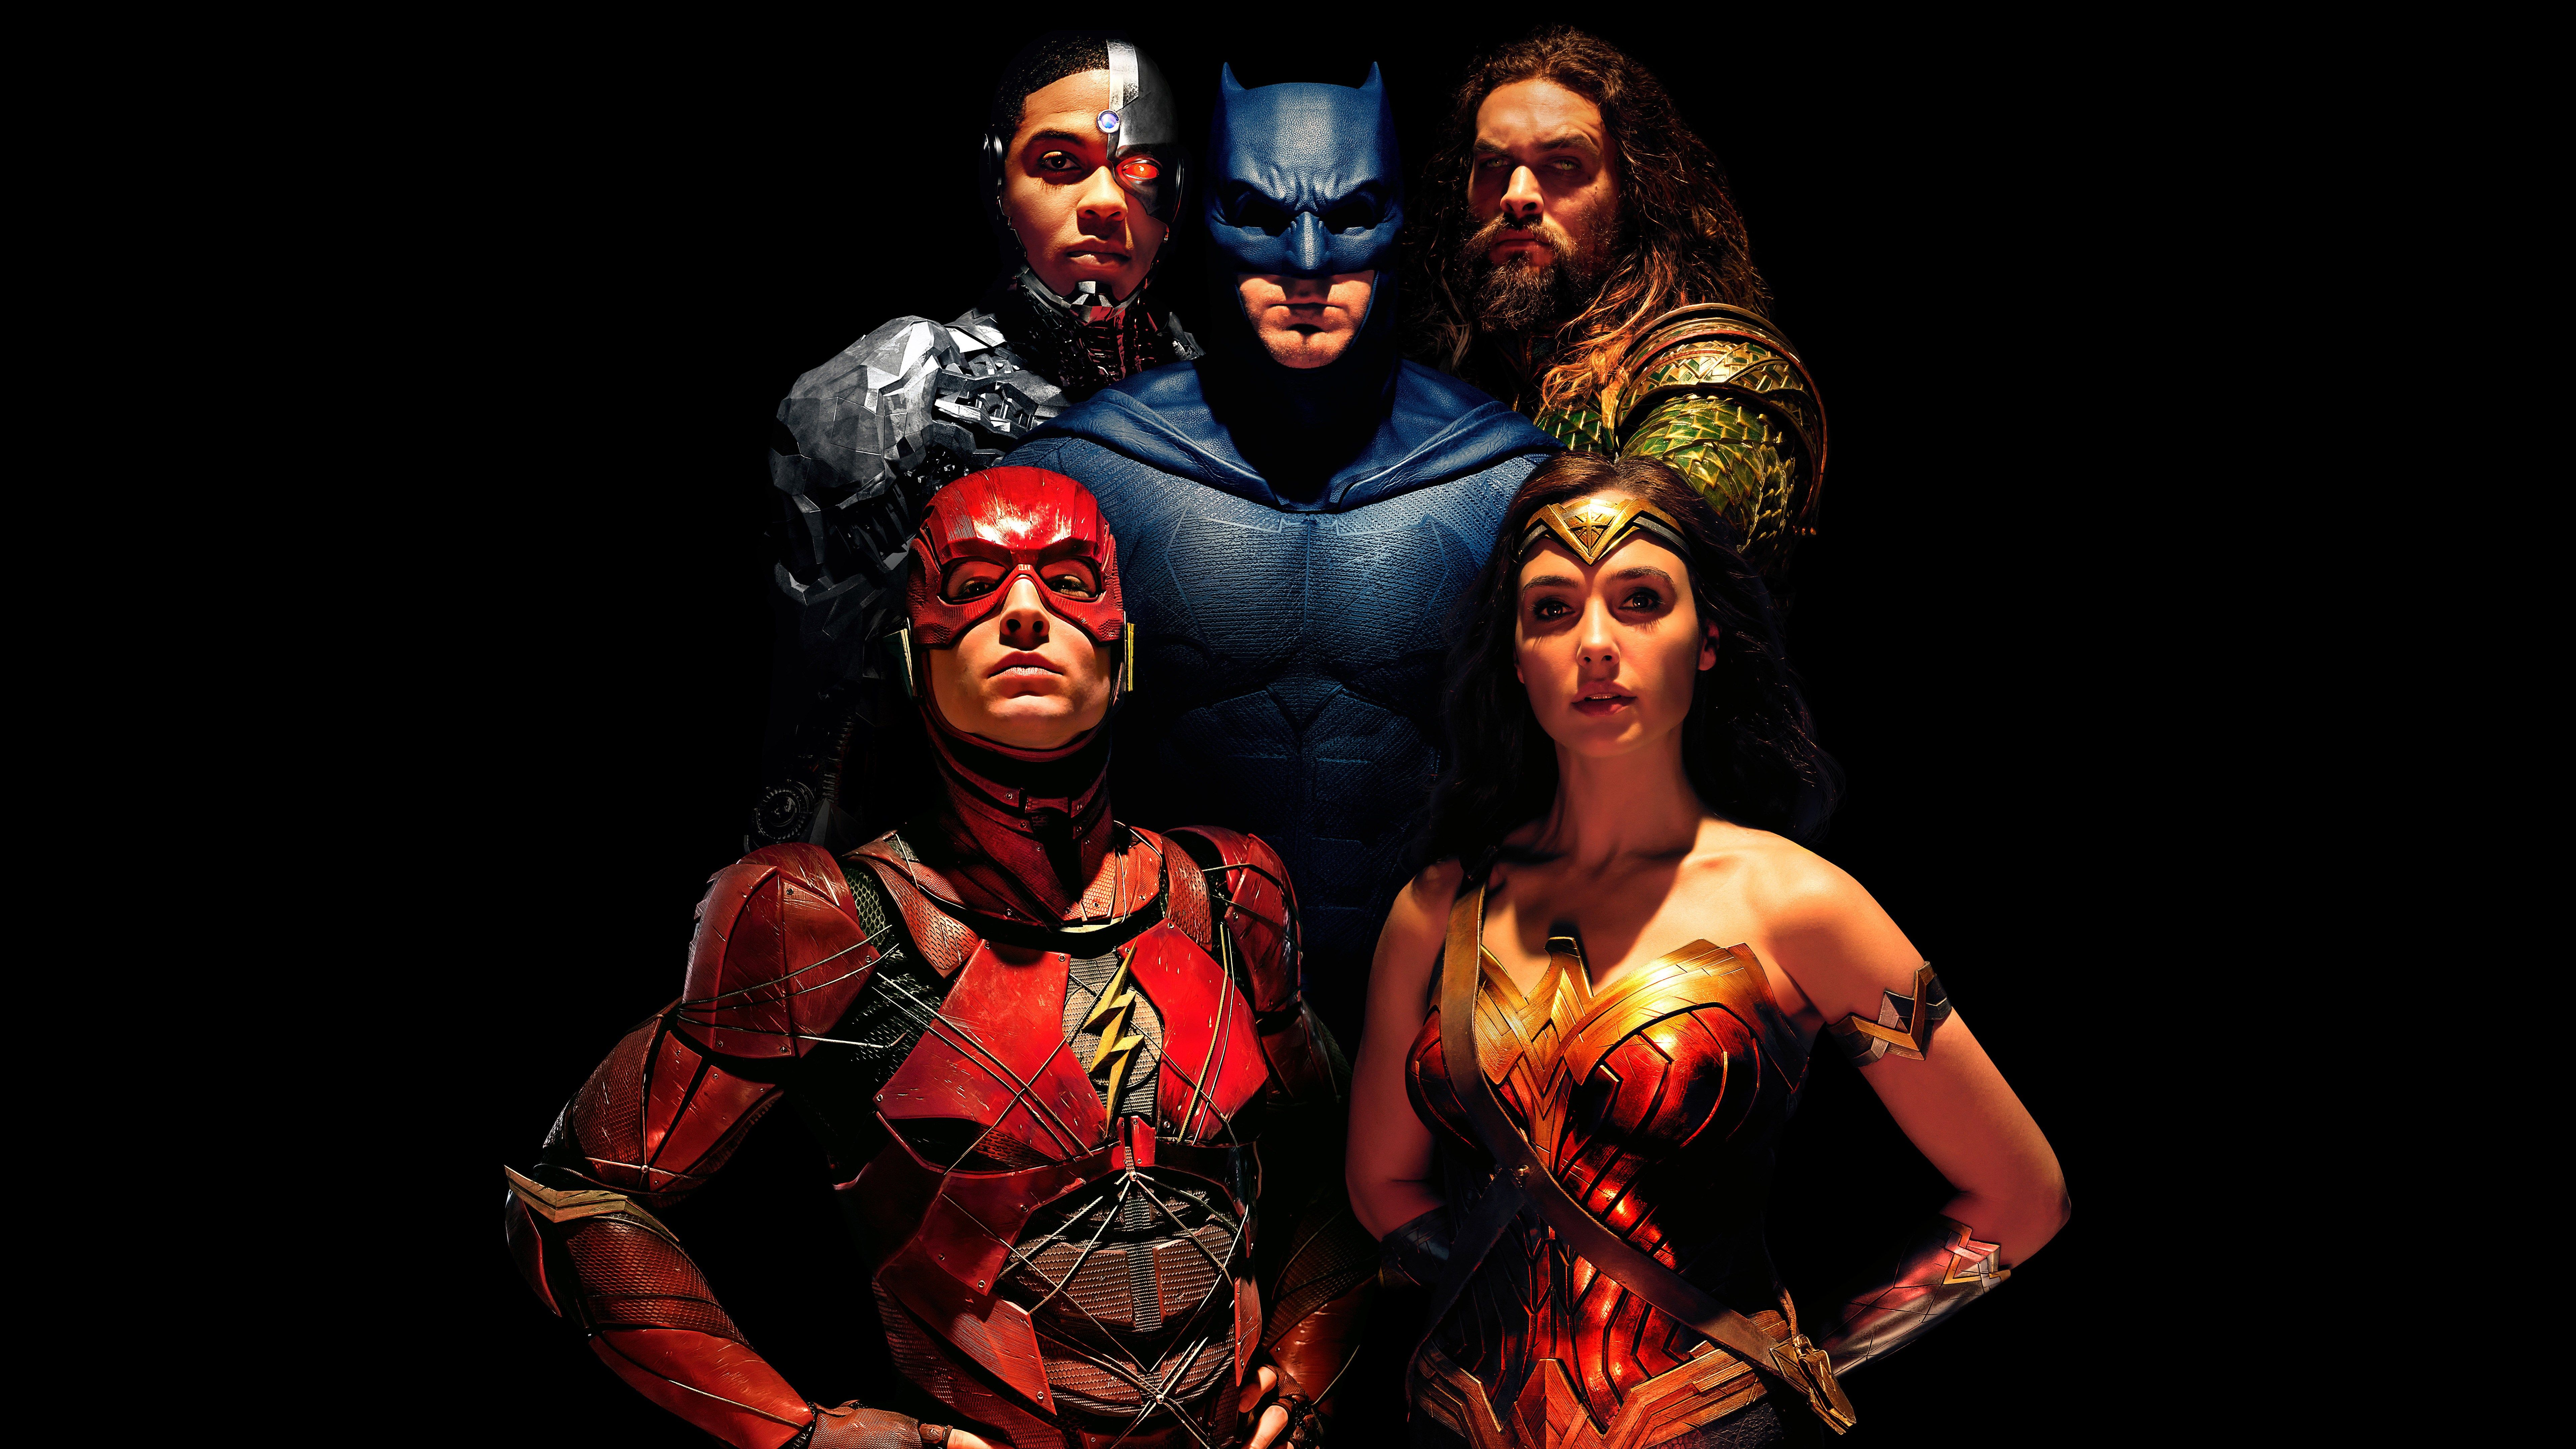 Justice League: Batman, Wonder Woman, Aquaman, The Flash, and Cyborg come together in 4K image